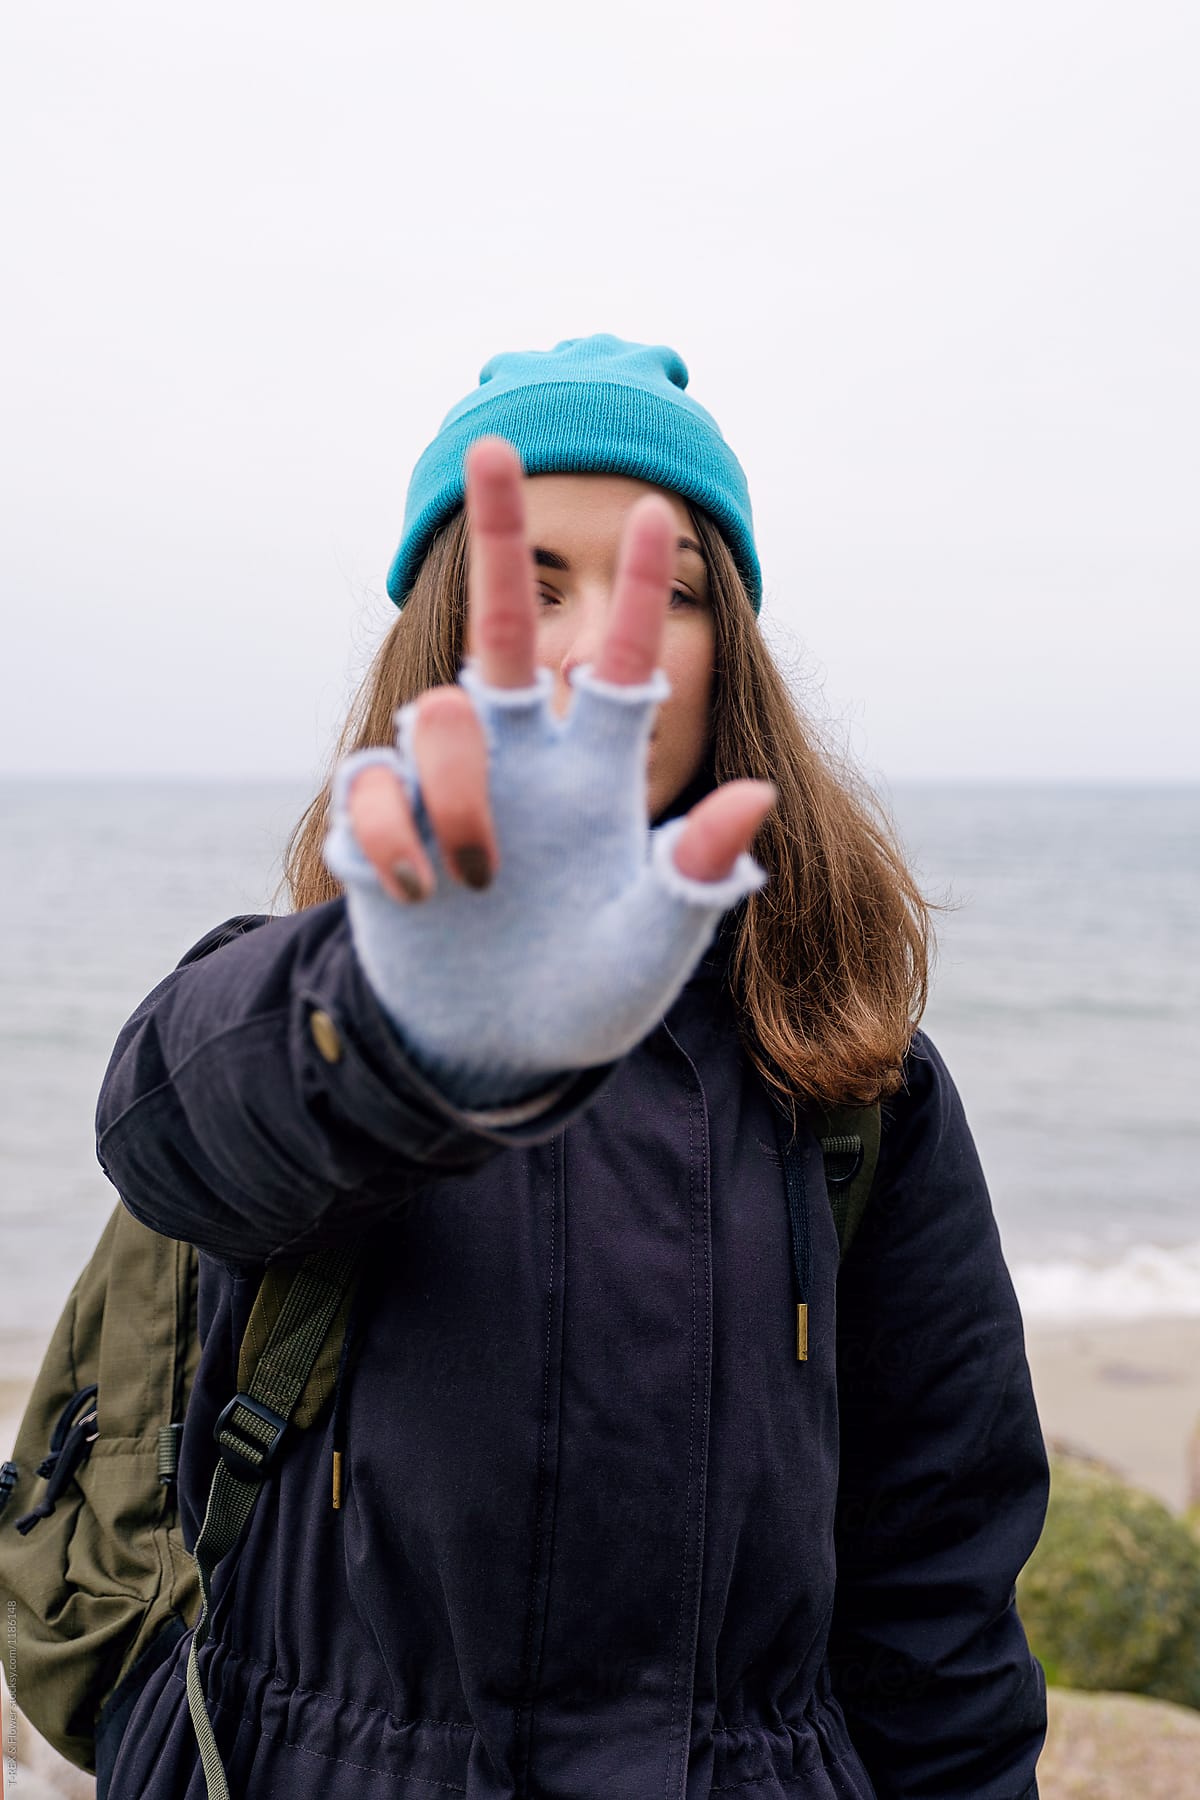 Girl shows two fingers sign at beach.